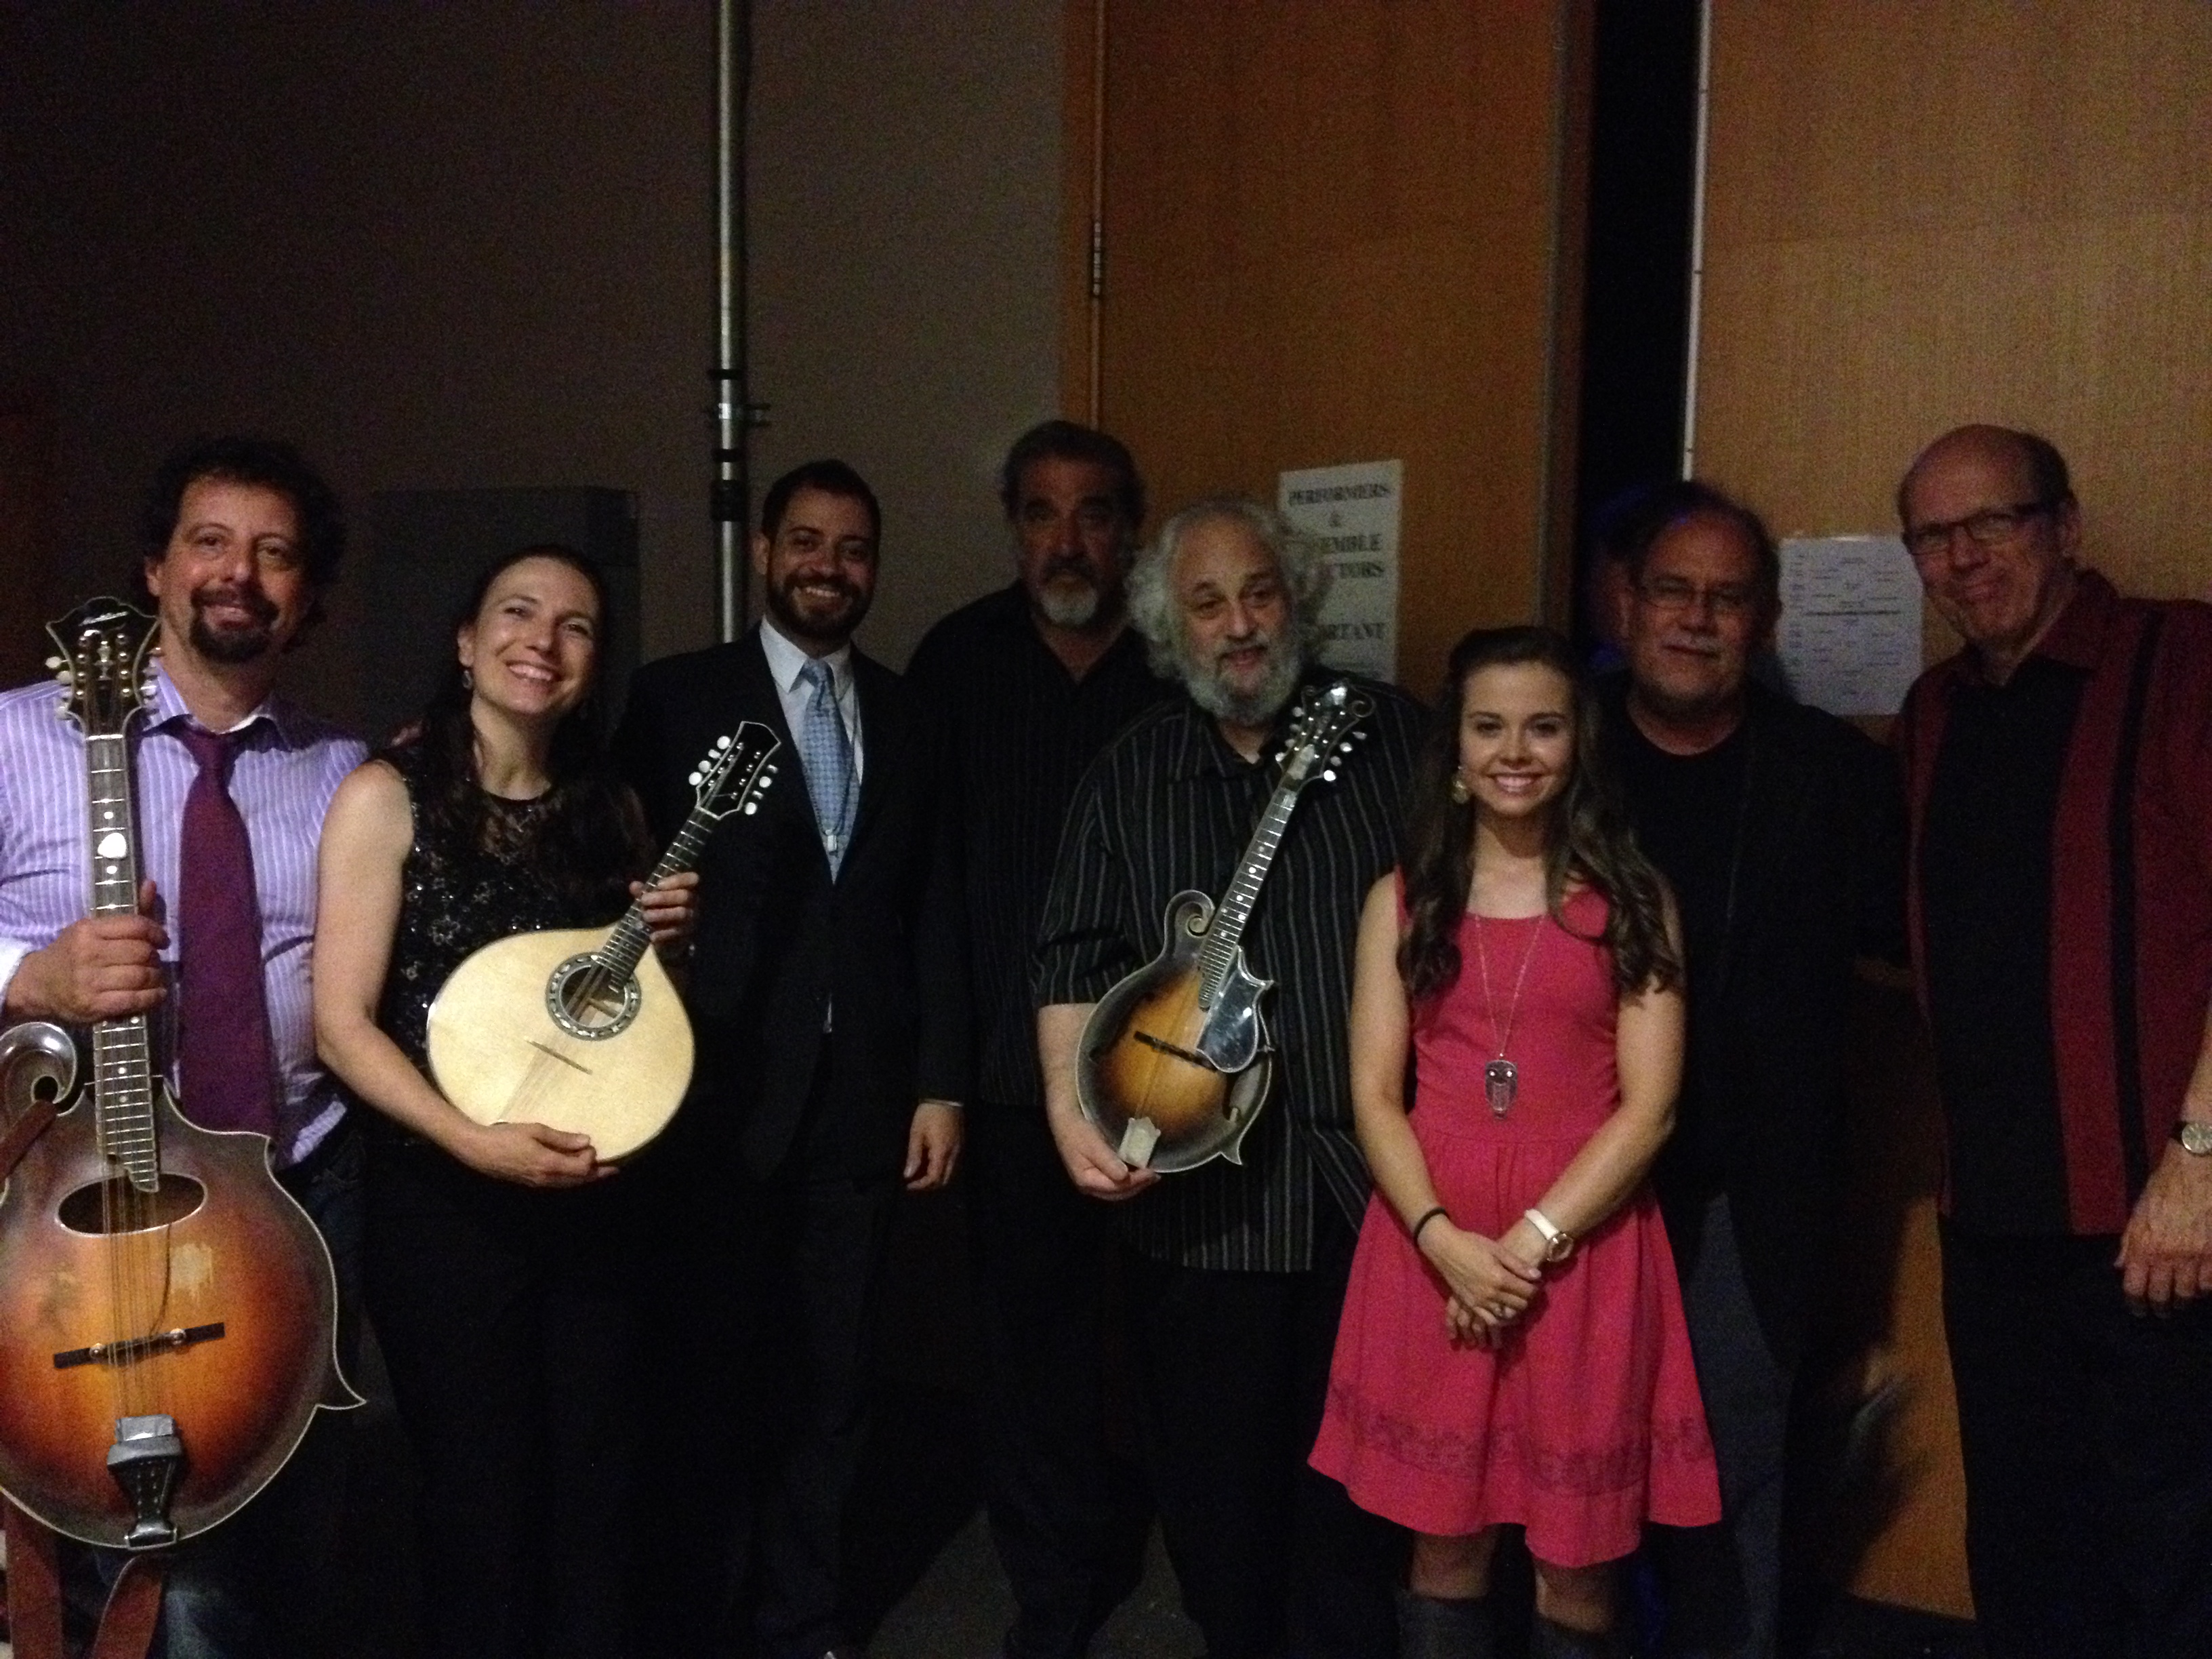 With Mike Marshall, Caterina Lichtenberg, Rich DelGrosso, David Grisman, Emory Lester, Don Stiernberg and Sierra Hull